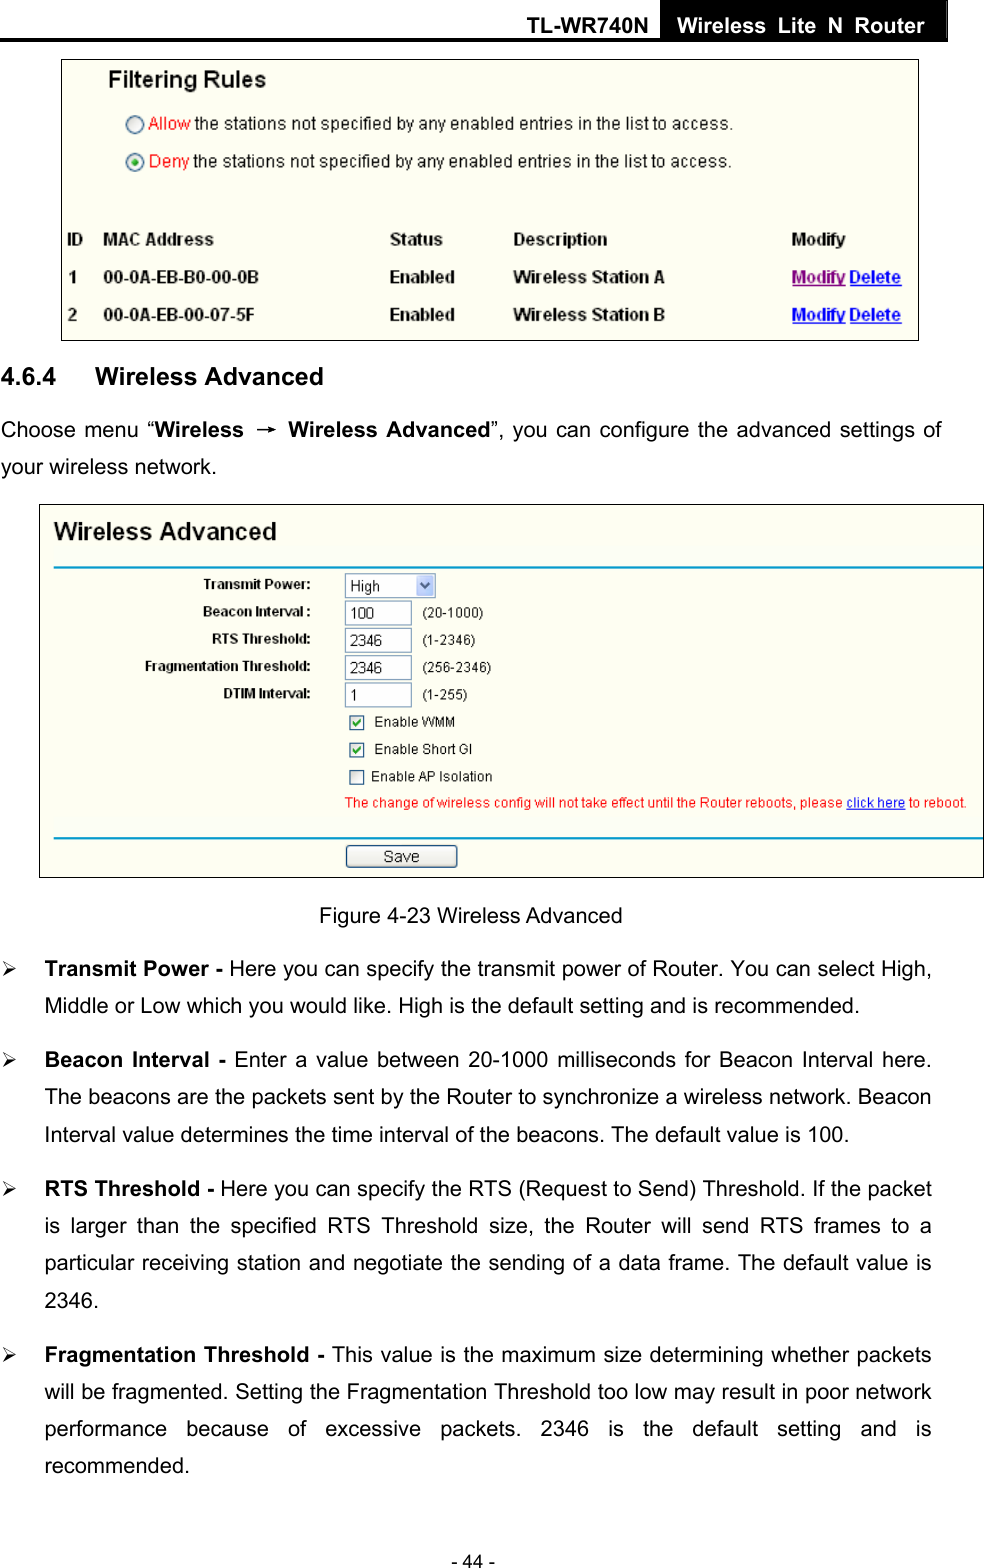 TL-WR740N Wireless Lite N Router  - 44 -  4.6.4  Wireless Advanced Choose menu “Wireless  → Wireless Advanced”, you can configure the advanced settings of your wireless network.  Figure 4-23 Wireless Advanced ¾ Transmit Power - Here you can specify the transmit power of Router. You can select High, Middle or Low which you would like. High is the default setting and is recommended. ¾ Beacon Interval - Enter a value between 20-1000 milliseconds for Beacon Interval here. The beacons are the packets sent by the Router to synchronize a wireless network. Beacon Interval value determines the time interval of the beacons. The default value is 100.   ¾ RTS Threshold - Here you can specify the RTS (Request to Send) Threshold. If the packet is larger than the specified RTS Threshold size, the Router will send RTS frames to a particular receiving station and negotiate the sending of a data frame. The default value is 2346.  ¾ Fragmentation Threshold - This value is the maximum size determining whether packets will be fragmented. Setting the Fragmentation Threshold too low may result in poor network performance because of excessive packets. 2346 is the default setting and is recommended.  